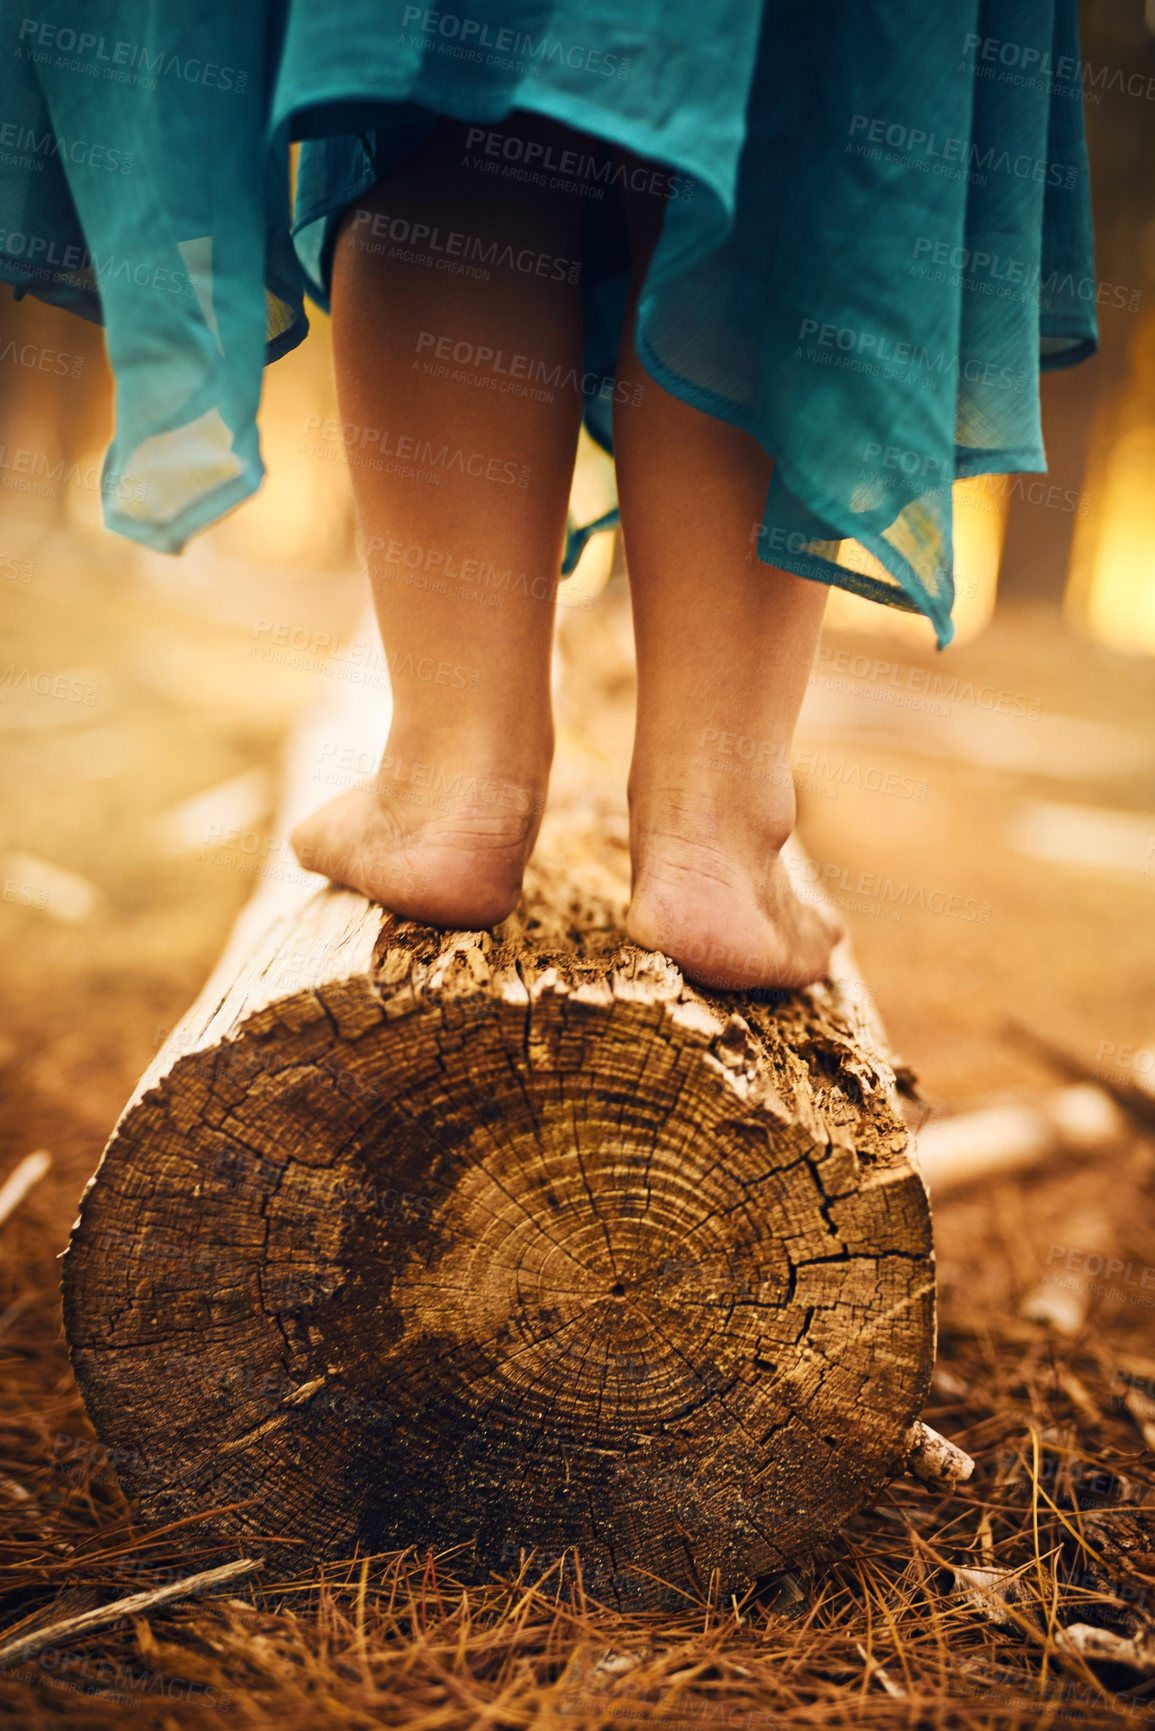 Buy stock photo Shot of an unrecognizable child's feet standing and balancing on a piece of wood outside in the woods